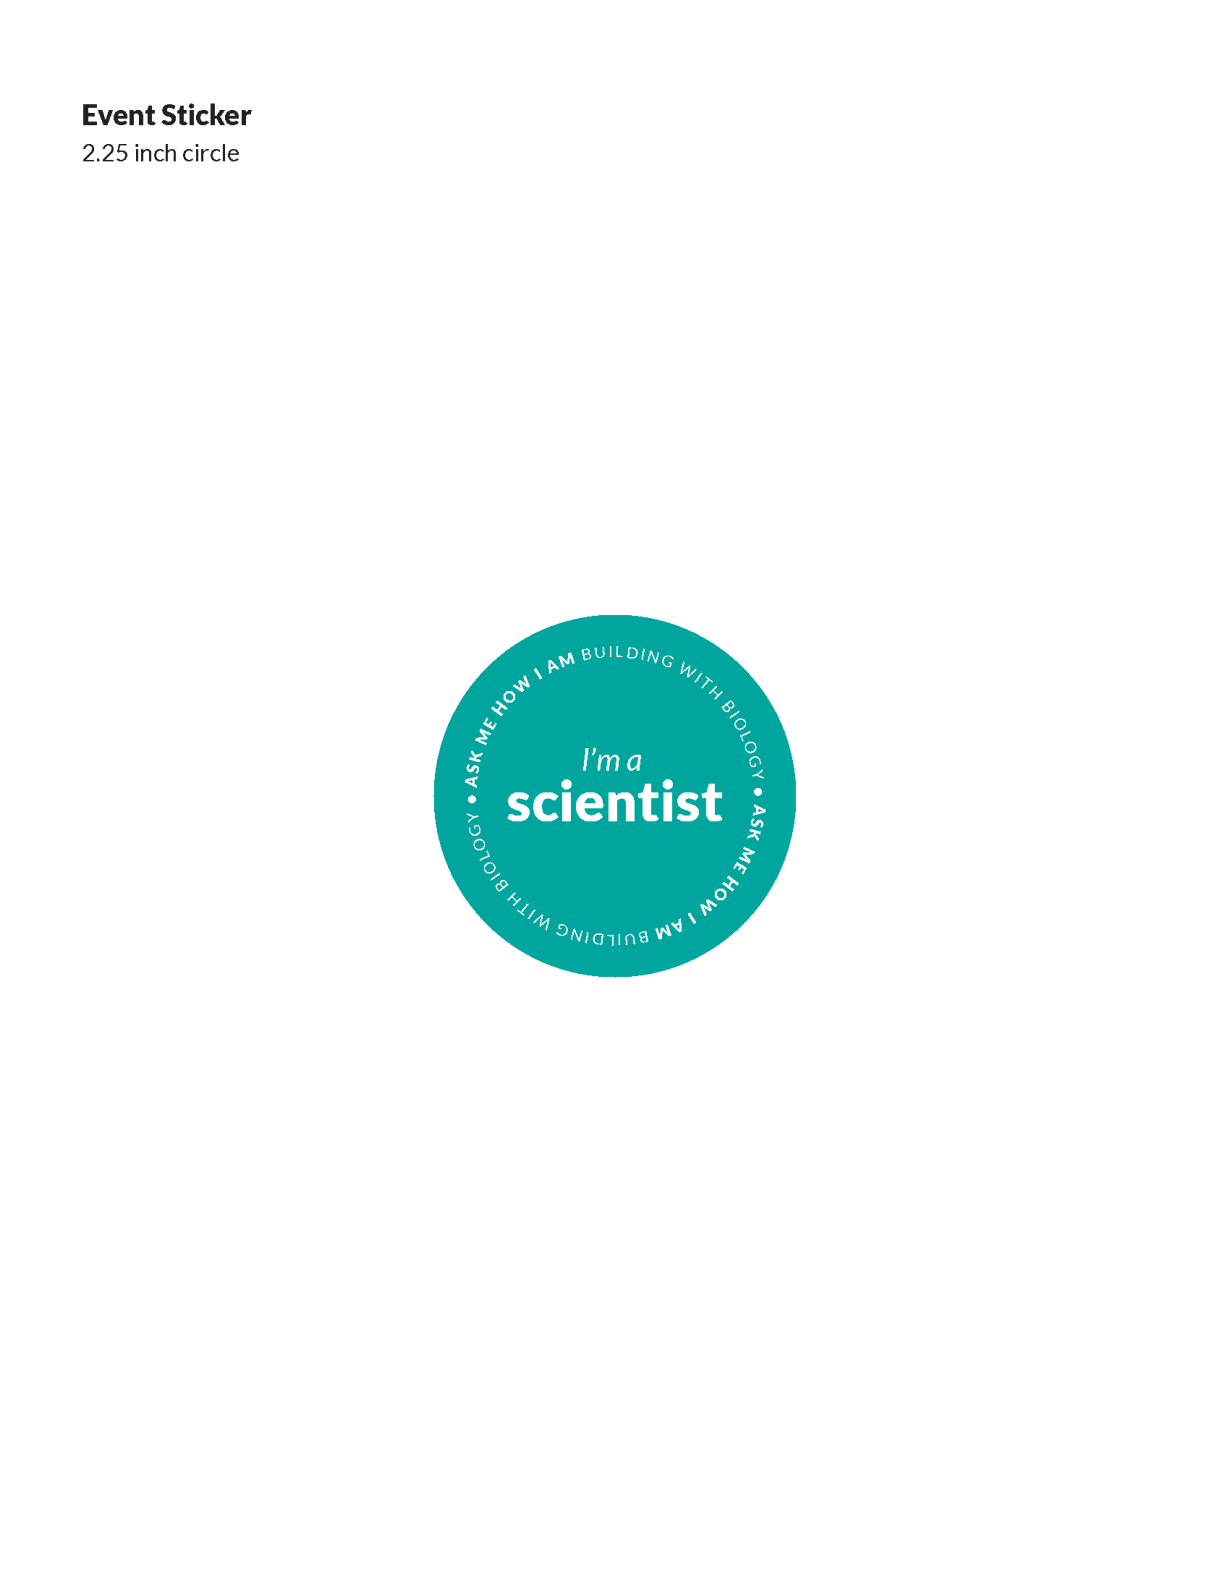 Building with Biology "I'm a scientist" sticker